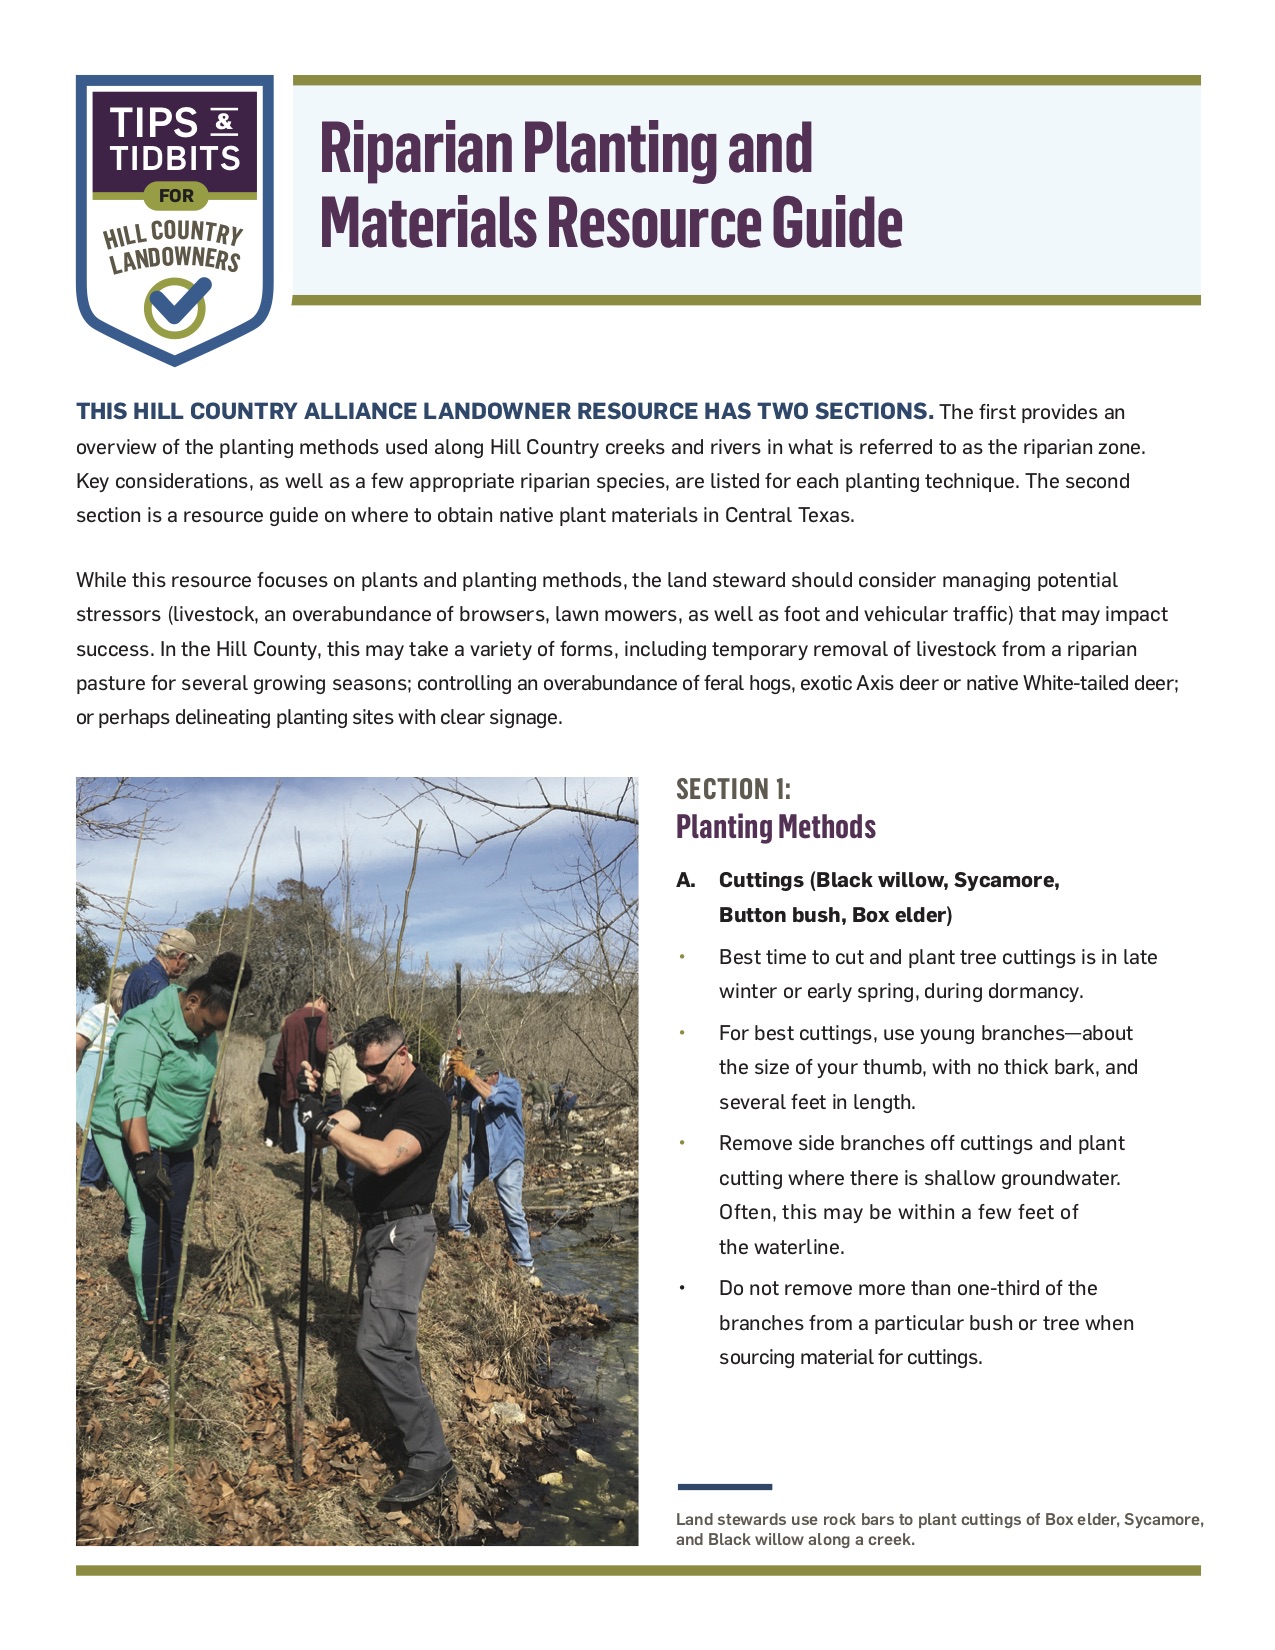 Cover for PDF "Riparian Planting and Materials Resource Guide"